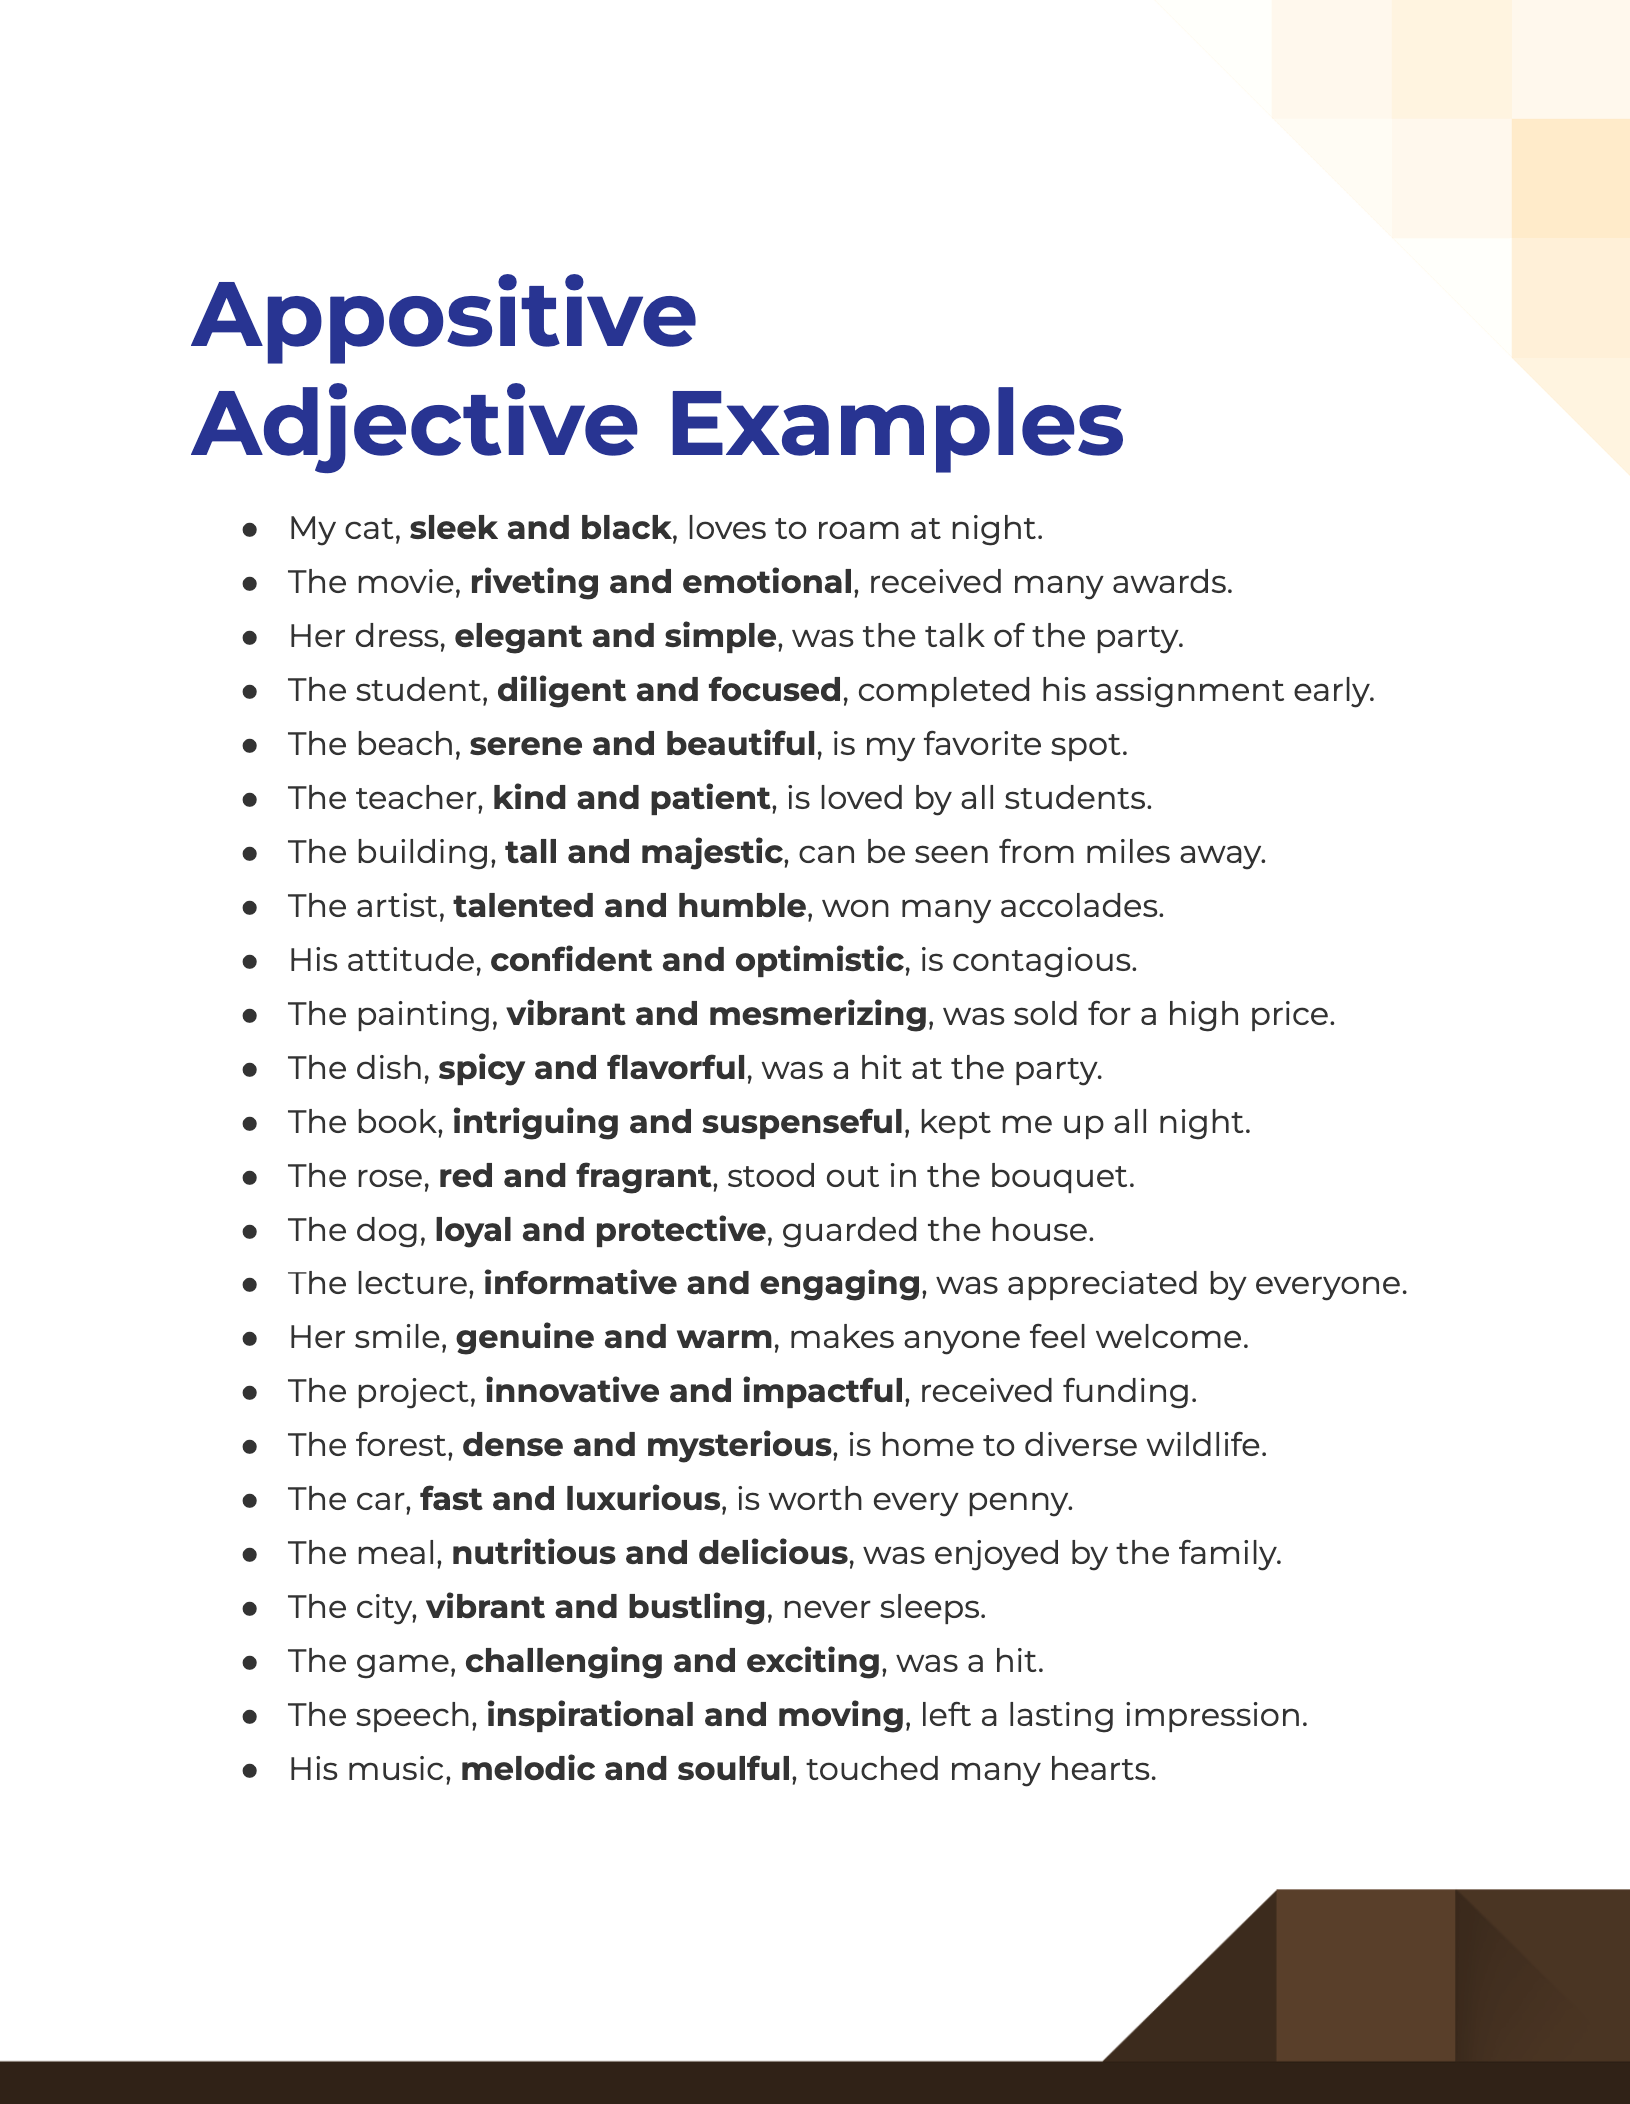 appositive adjective examples1